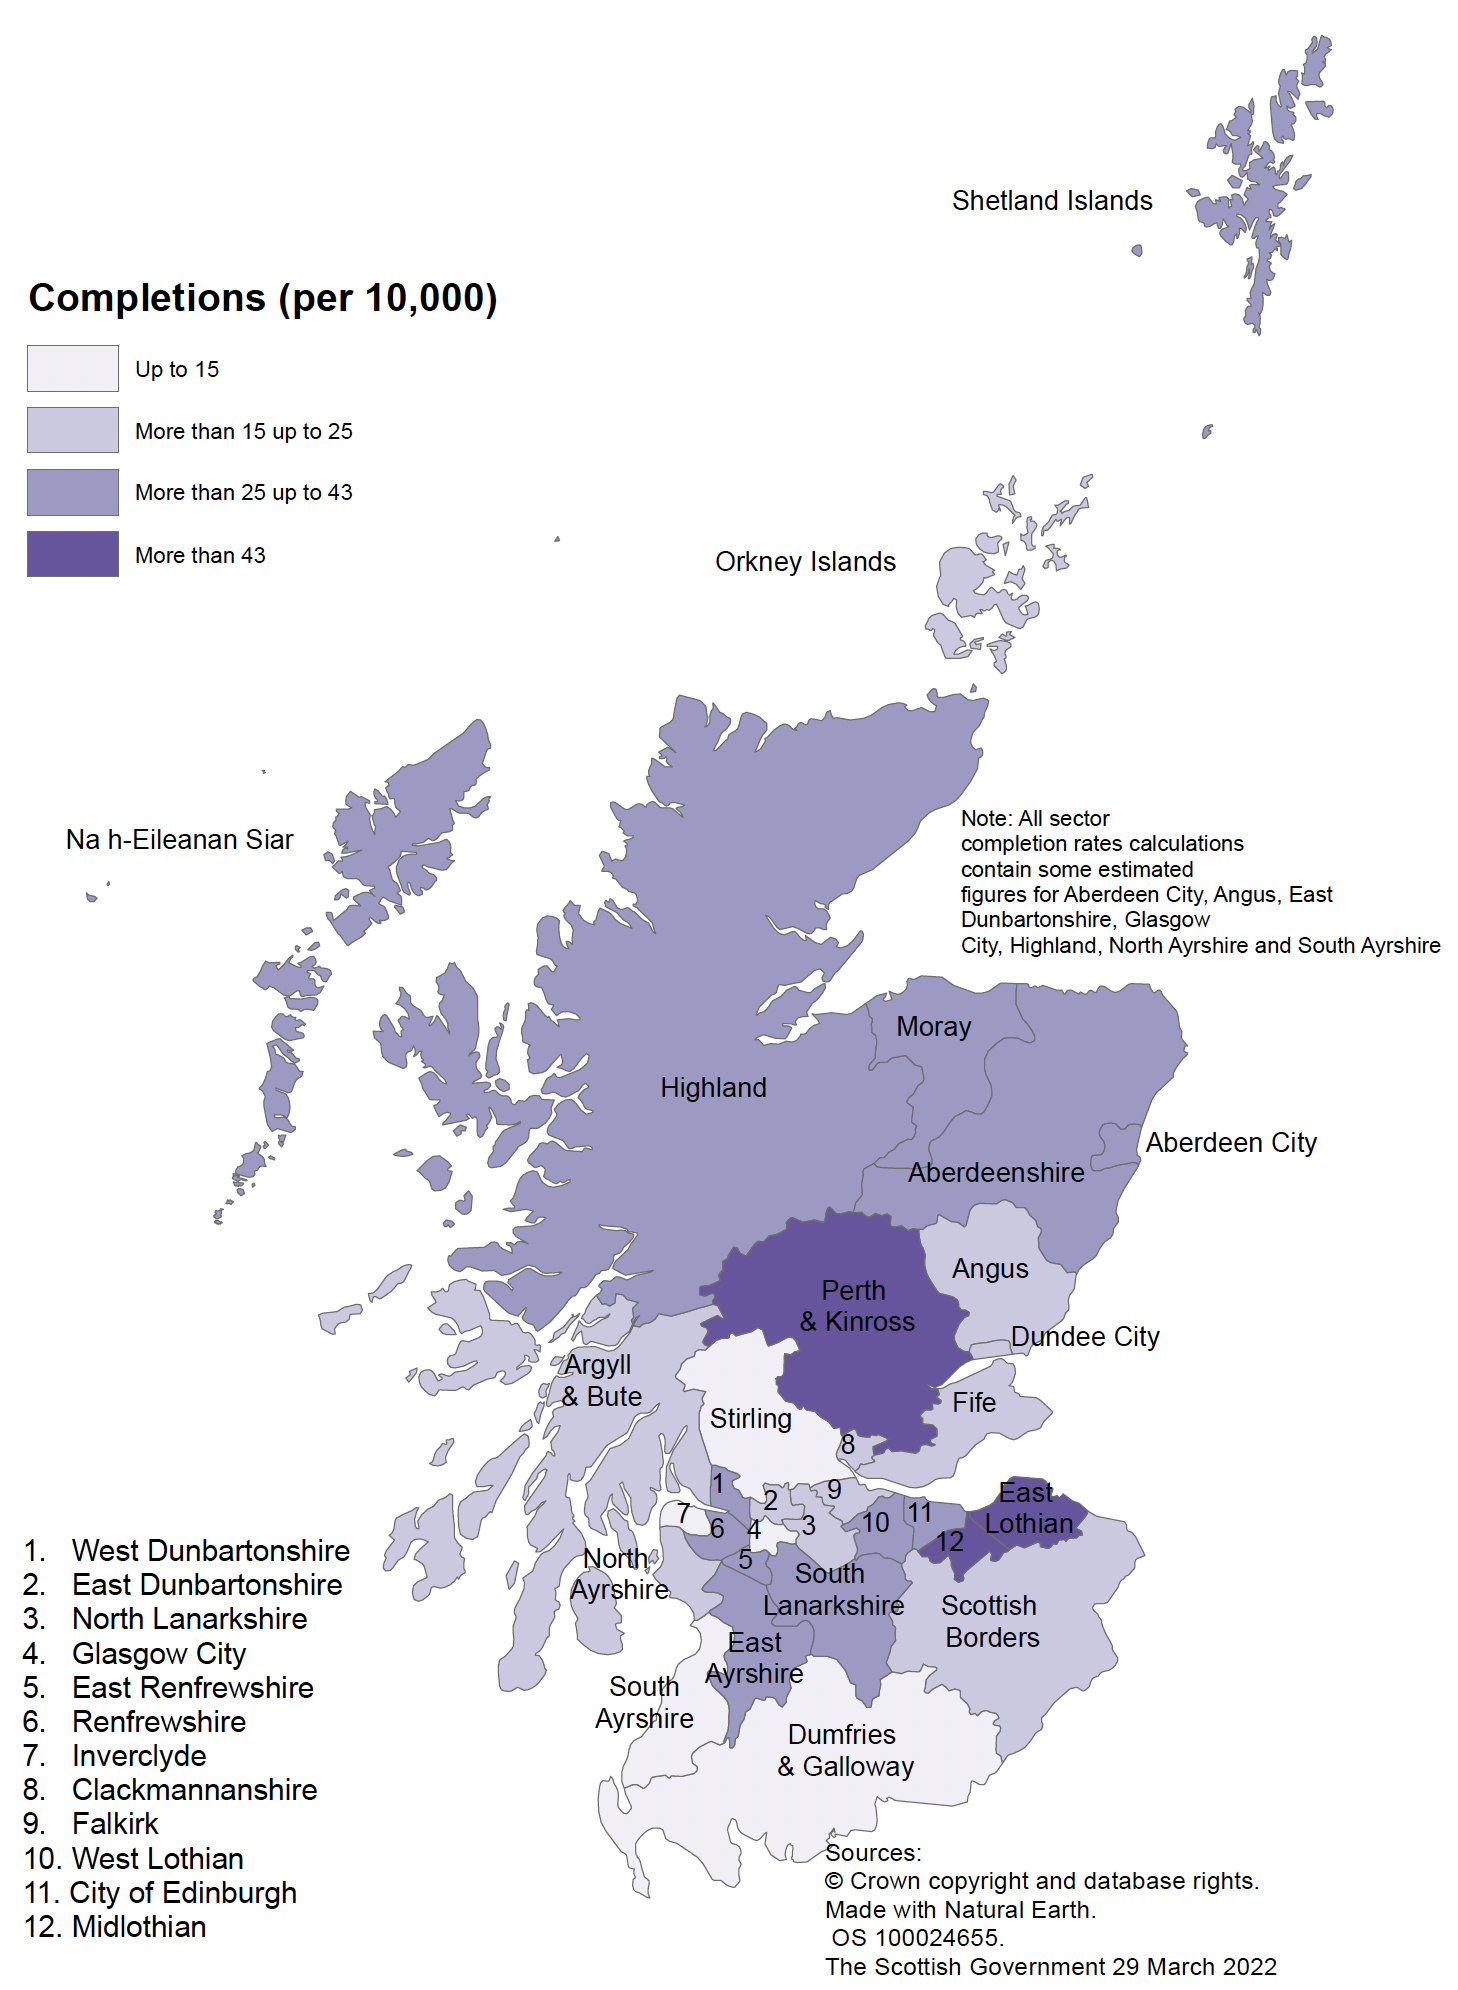 Map A: New build housing – A map of local authority areas in Scotland showing all-sector completion rates per 10,000 population for year to end March 2021. The highest rates were observed in East Lothian, Midlothian, Perth & Kinross, and West Dunbartonshire, with rates of more than 40 homes per 10,000 of population. The lowest rates were observed in Inverclyde, Dumfries & Galloway, Stirling, Glasgow City, and South Ayrshire, with less than 10 completions per 10,000 people.